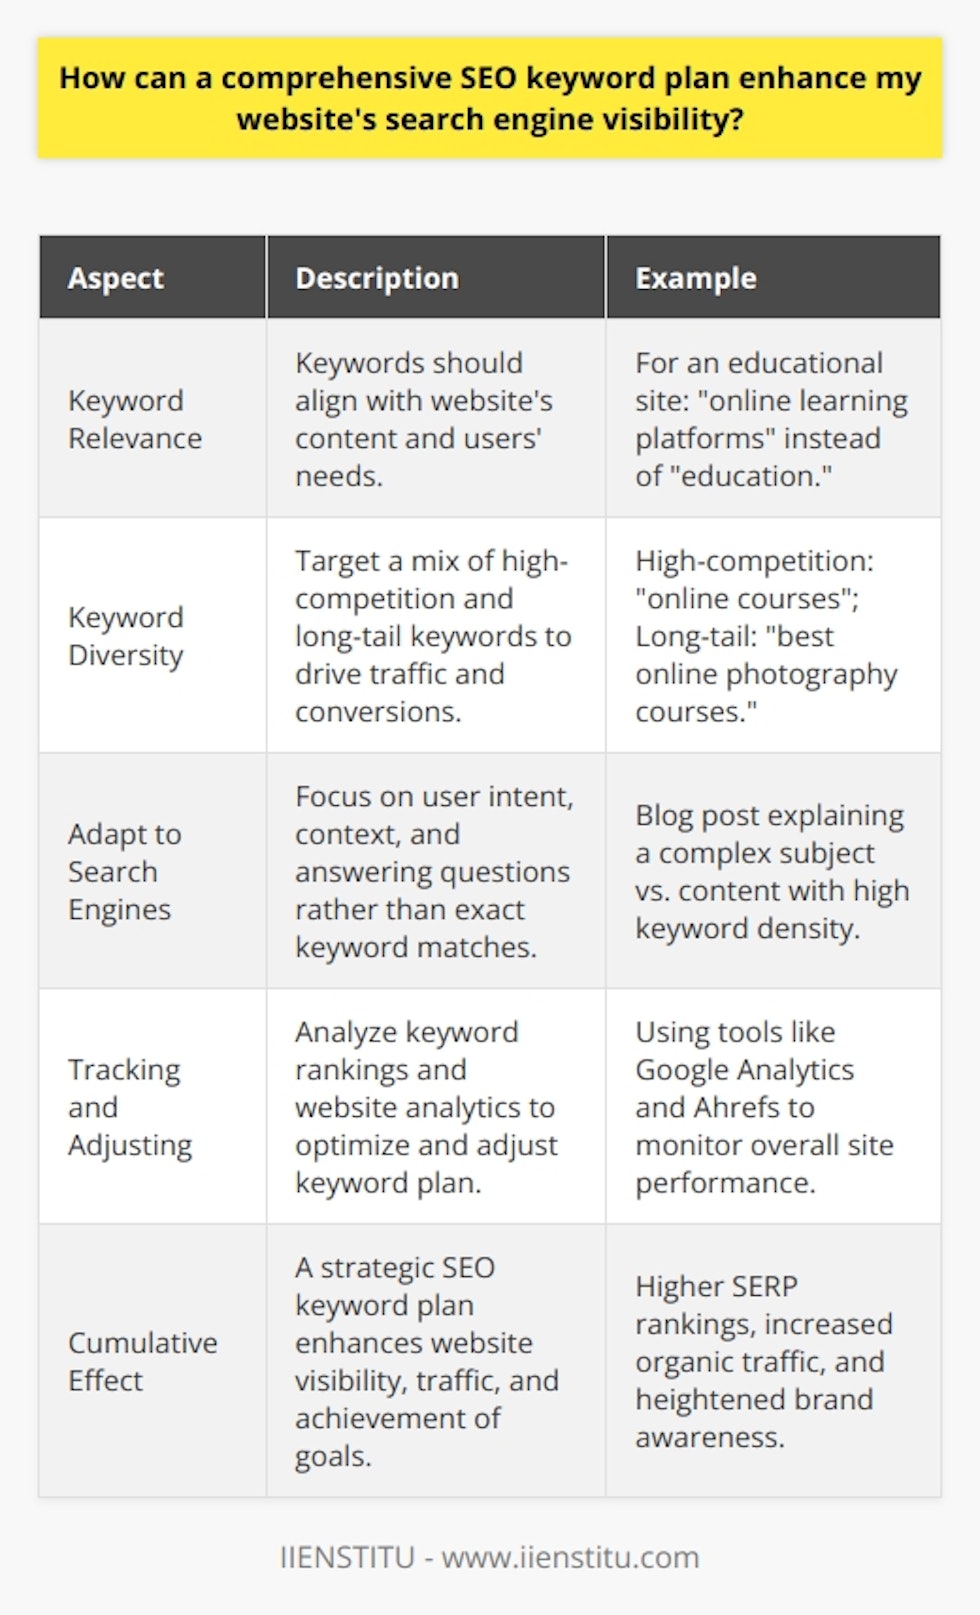 A comprehensive SEO keyword plan is crucial in optimizing a website for search engines and enhancing its visibility. Effective use of keywords enables websites to rank better for relevant searches, directly influencing web traffic and online success.**Why Create a Comprehensive SEO Keyword Plan?**Search engines use complex algorithms to determine the relevance and authority of web pages. Keywords are the linchpins of this system, acting as indicators for search engine crawlers. A well-researched keyword plan helps ensure that content is discoverable and valuable to the target audience, thus improving the website's search engine rankings.**The Importance of Keyword Relevance**Keywords must be chosen not only for their search volume but also their relevance to the website's content and the users' needs. A site dedicated to educational content, for instance, should focus on keywords that align with educational queries and the institution’s priorities, such as online learning platforms, rather than generic terms like education.**The Need for Keyword Diversity**To compete effectively, a website should target a mix of high-competition keywords and niche-specific long-tail keywords. While high-competition keywords can drive significant traffic, long-tail keywords often convert better as they align closely with specific user queries.**Adapting to Search Engines’ Evolution**Search engines are increasingly prioritizing user intent and context over exact keyword matches. Creating content that answers the users’ questions and providing context around keywords is becoming ever more important. For example, a blog post that thoroughly explains a complex subject while organically integrating keywords and synonymous phrases would perform better than content that focuses solely on keyword density.**Tracking and Adjusting Keywords**Even the best keyword plan requires monitoring and adjusting. Regular analysis of page performance can reveal insights into which keywords are bringing traffic and engaging users. Using tools that track keyword rankings and website analytics provides valuable feedback for continual optimization.**Conclusion: The Cumulative Effect of a Strategic SEO Keyword Plan**An all-inclusive SEO keyword plan that incorporates understanding of user intent, thorough research, smart content placement, and adaptation to search engine evolutions can profoundly impact a website's visibility. It improves the likelihood of high SERP rankings, leading to increased organic traffic, heightened brand awareness, and, ultimately, the achievement of a website's goals. Implement such strategies with consideration and regular refinement for the best results.